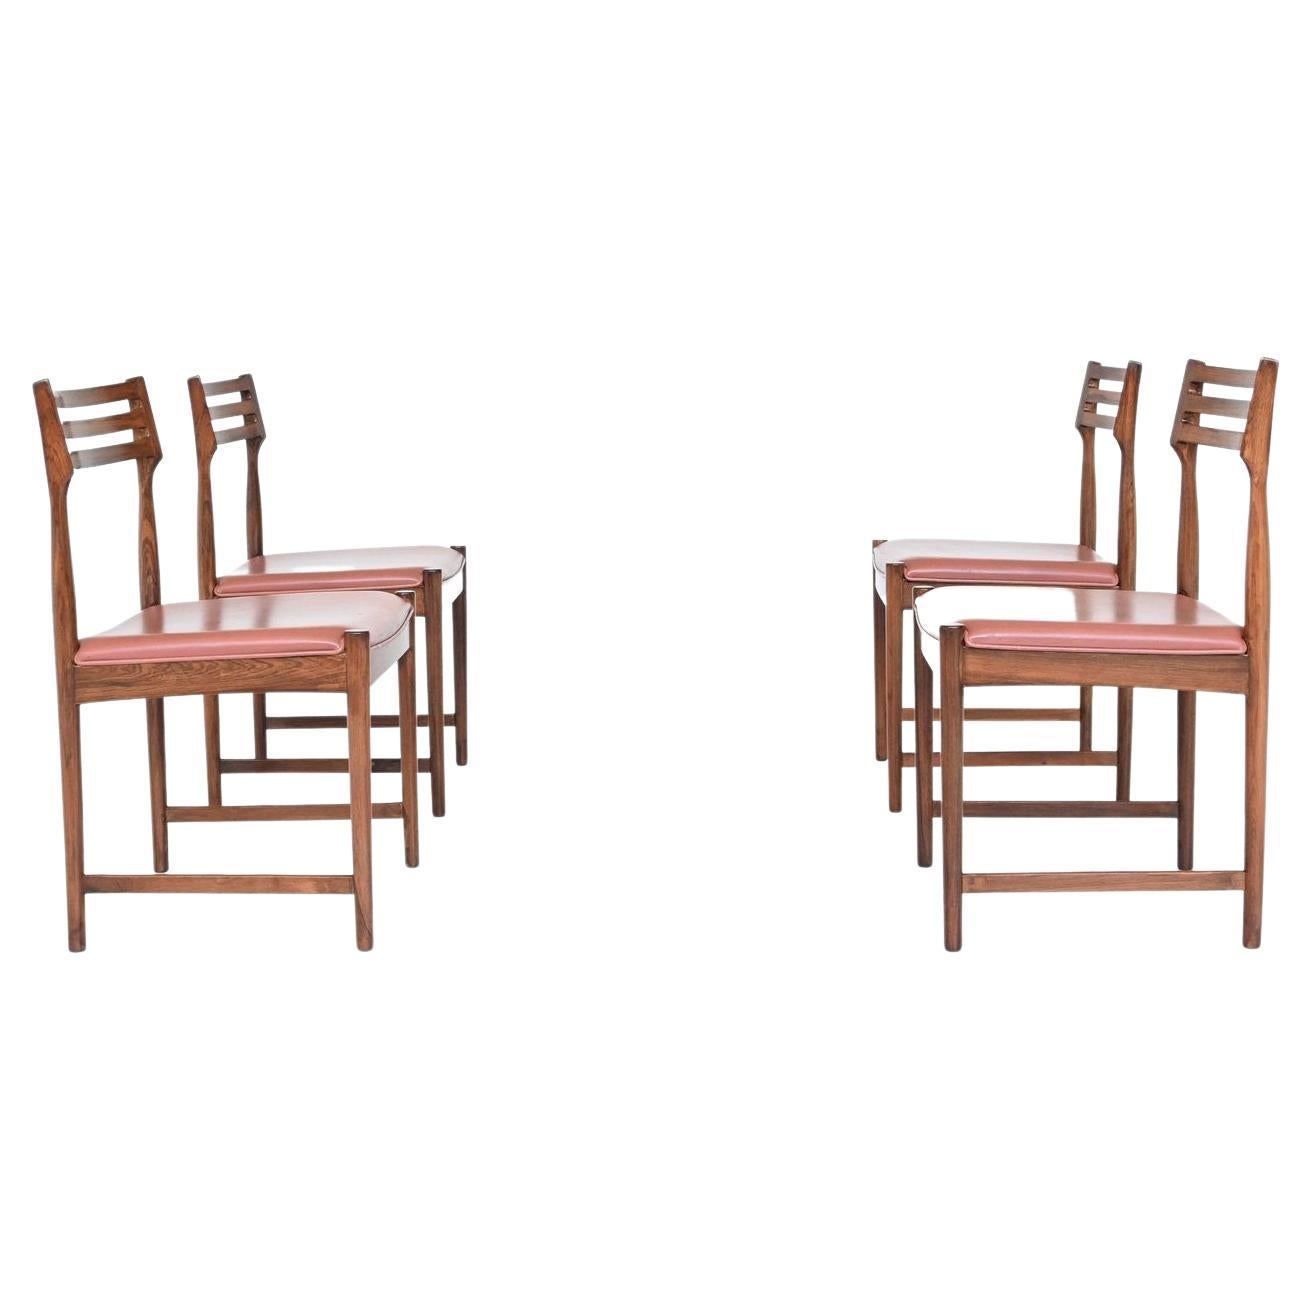 Beautiful set of four dining chairs designed by Danish designer Severin Hansen for Dutch manufacturer Bovenkamp, Denmark 1960. These well-crafted chairs are made of nicely grained solid rosewood and the seats are upholstered with original brown